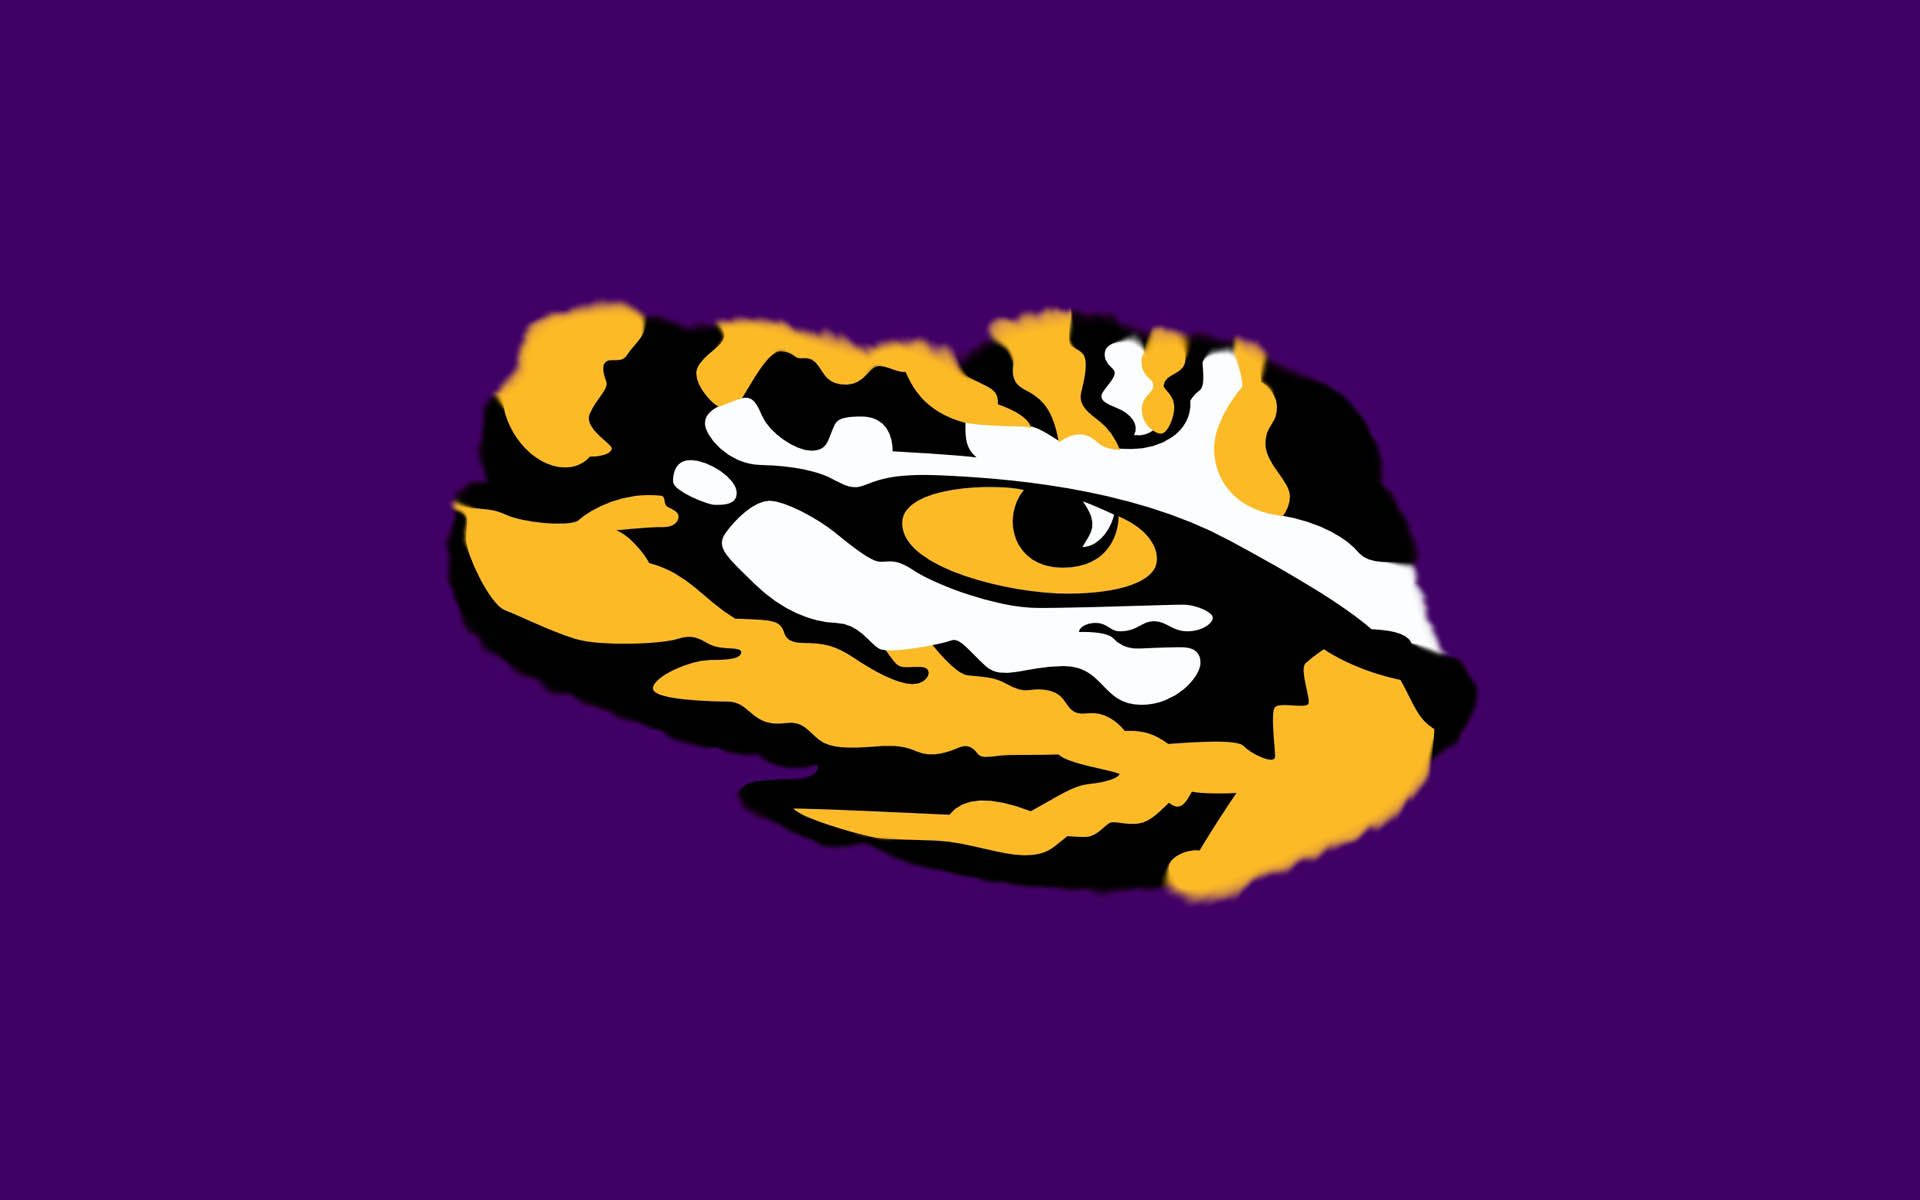 Show Your Support - Go Lsu! Background